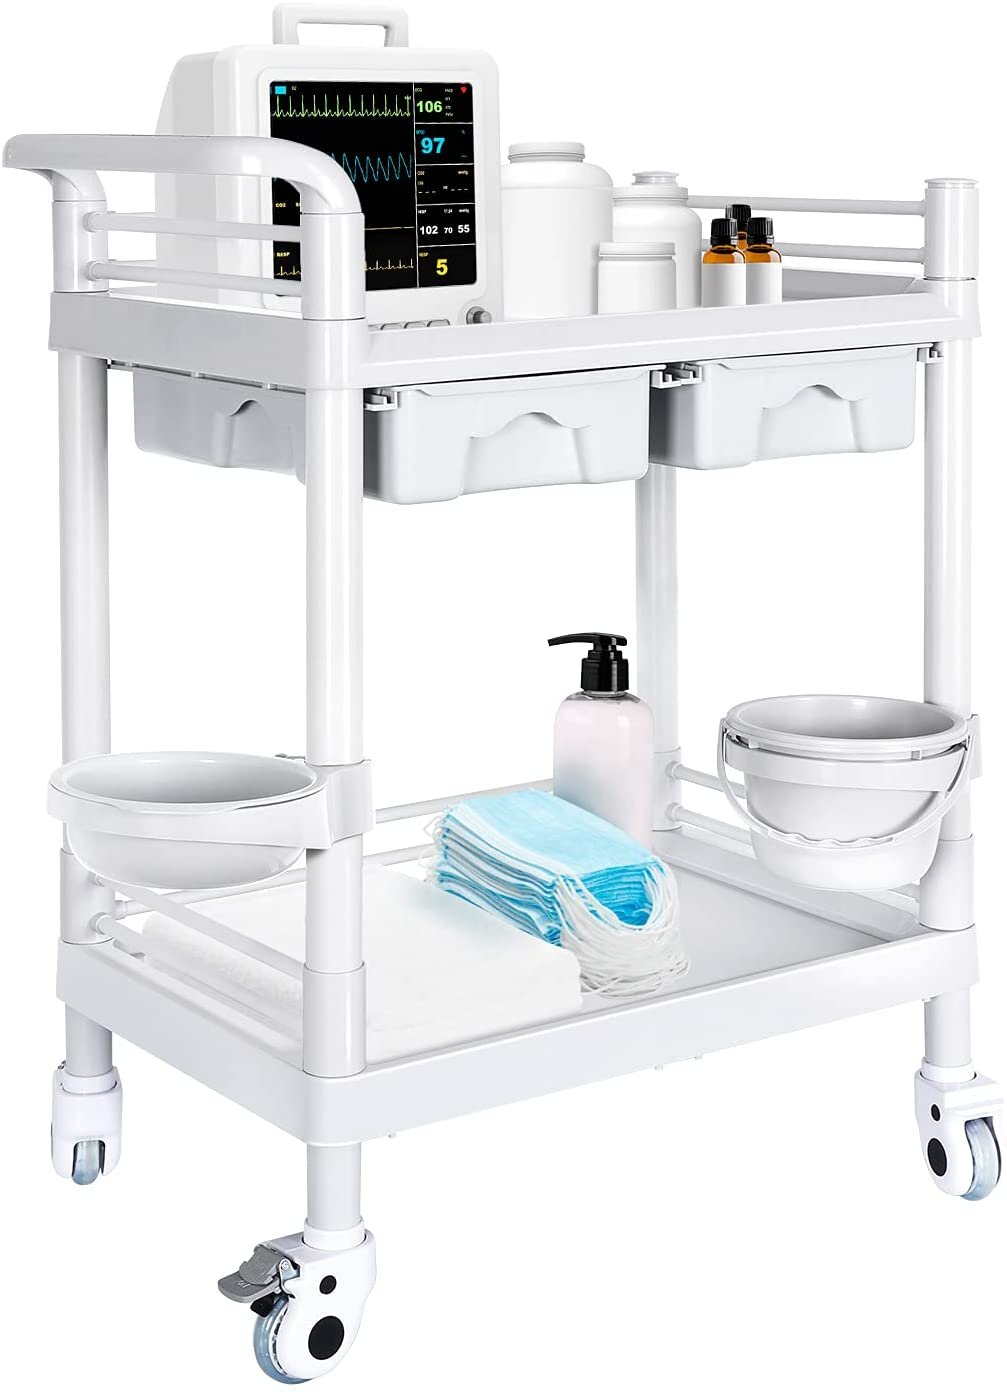 2 Tier Stainless Steel Medical Cart Assemble The Surgical Cart Surgical Dressing Changer Instrument Vehicles for Care Homes and Dentistry First Aid Size : Big 